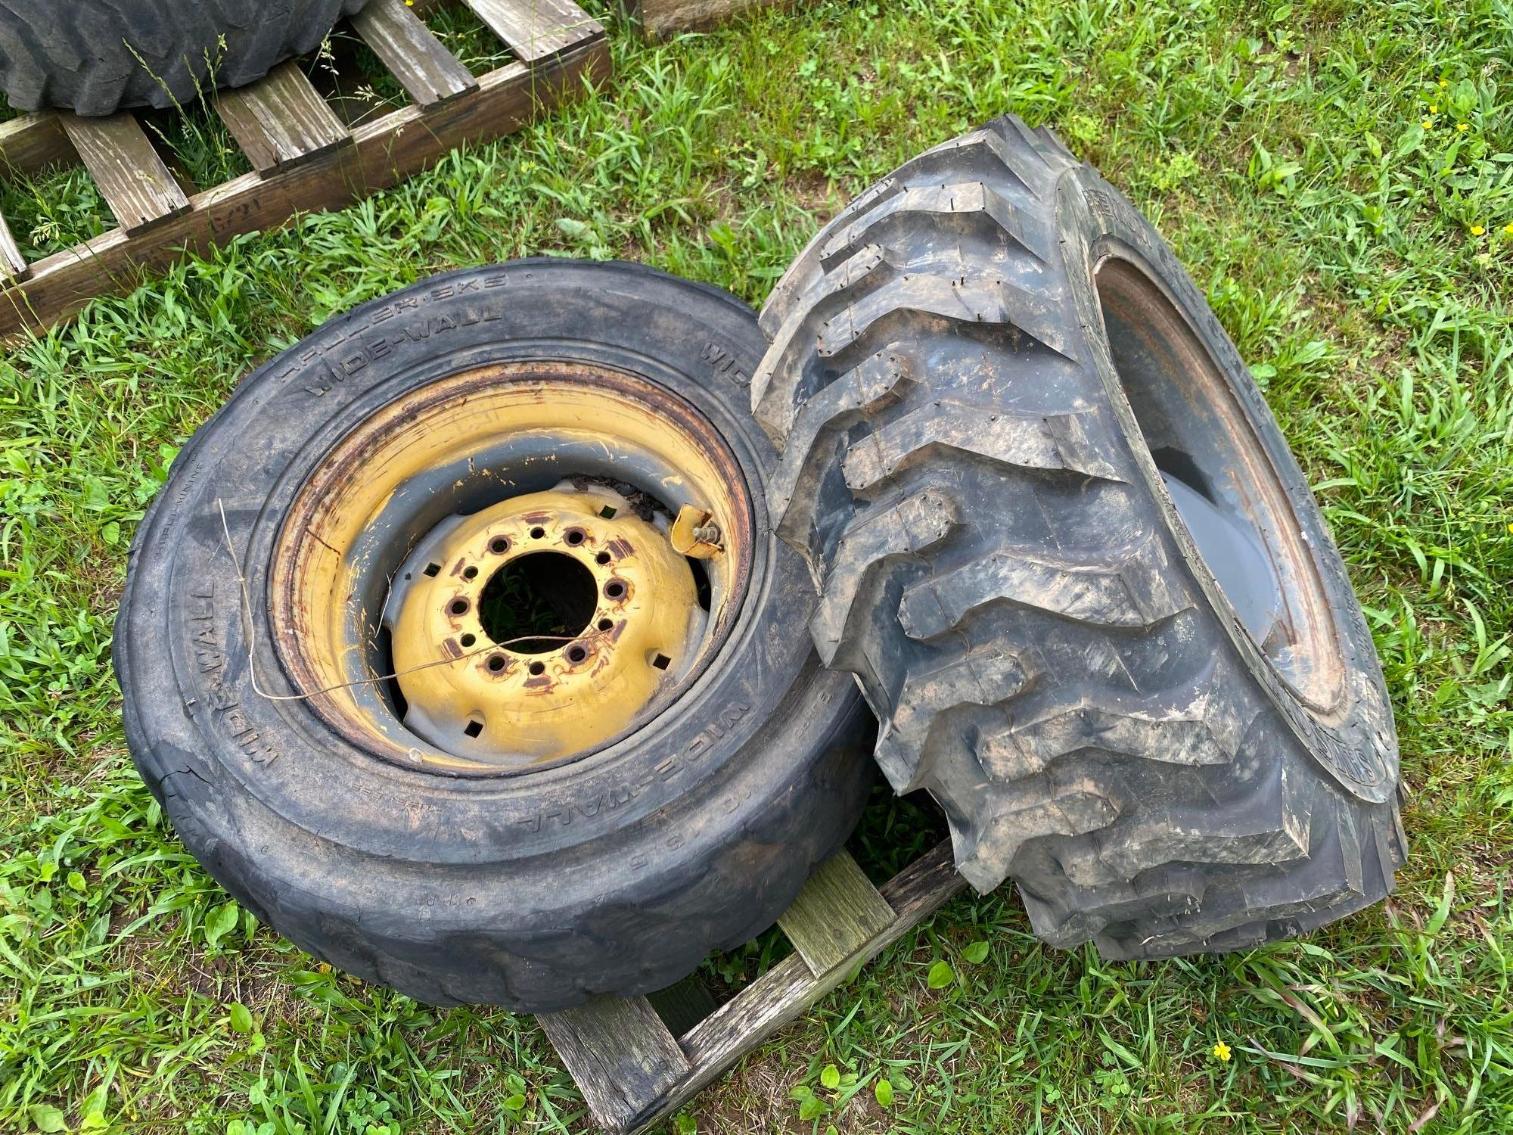 Image for 1 Thomas Skid Steer Wheel 10/16.l with new tire & New Holland Skid Steer Wheel and Tire 